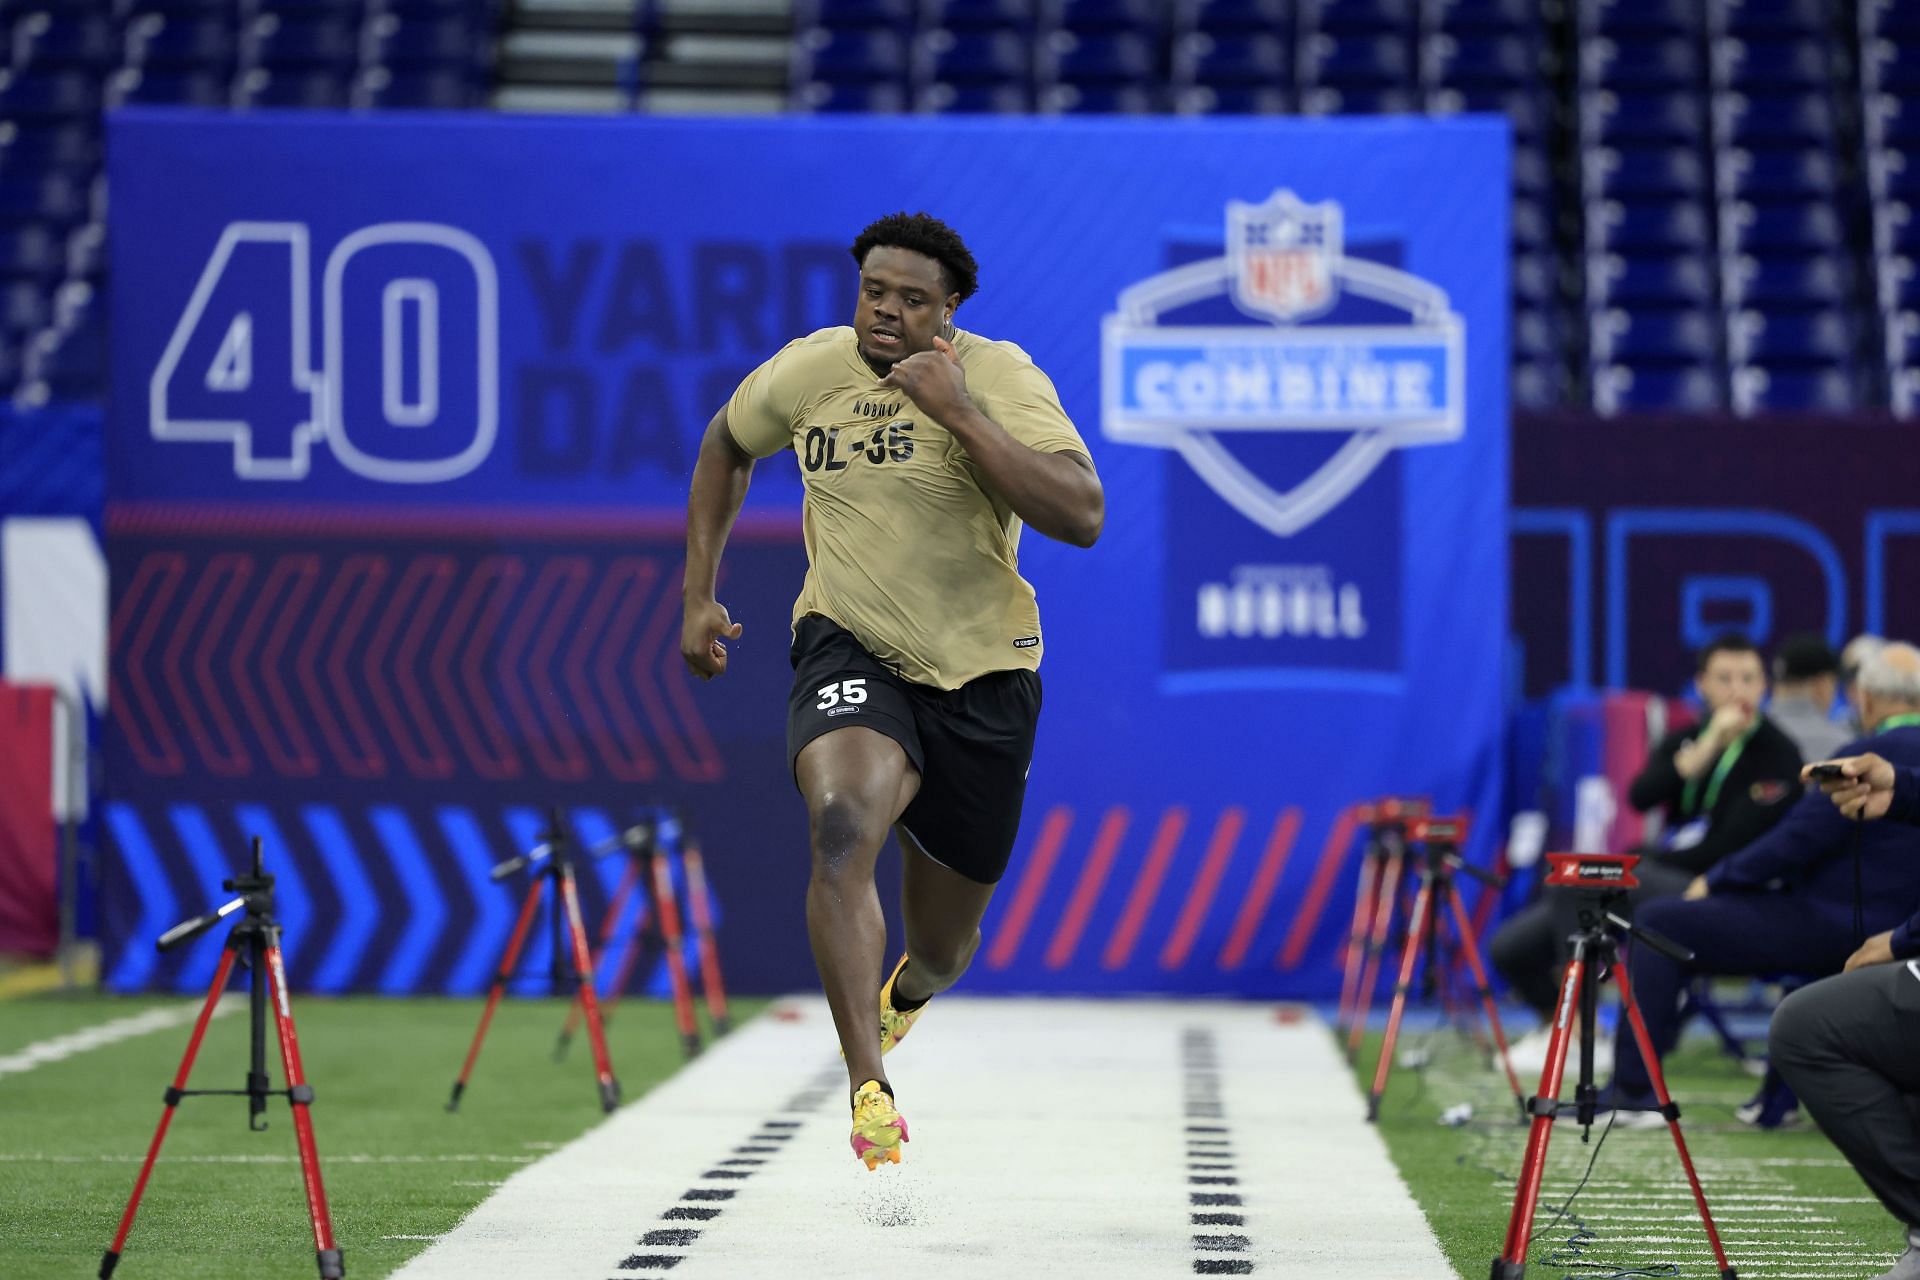 Christian Jones #OL35 of Texas participates in the 40-yard dash during the NFL Combine